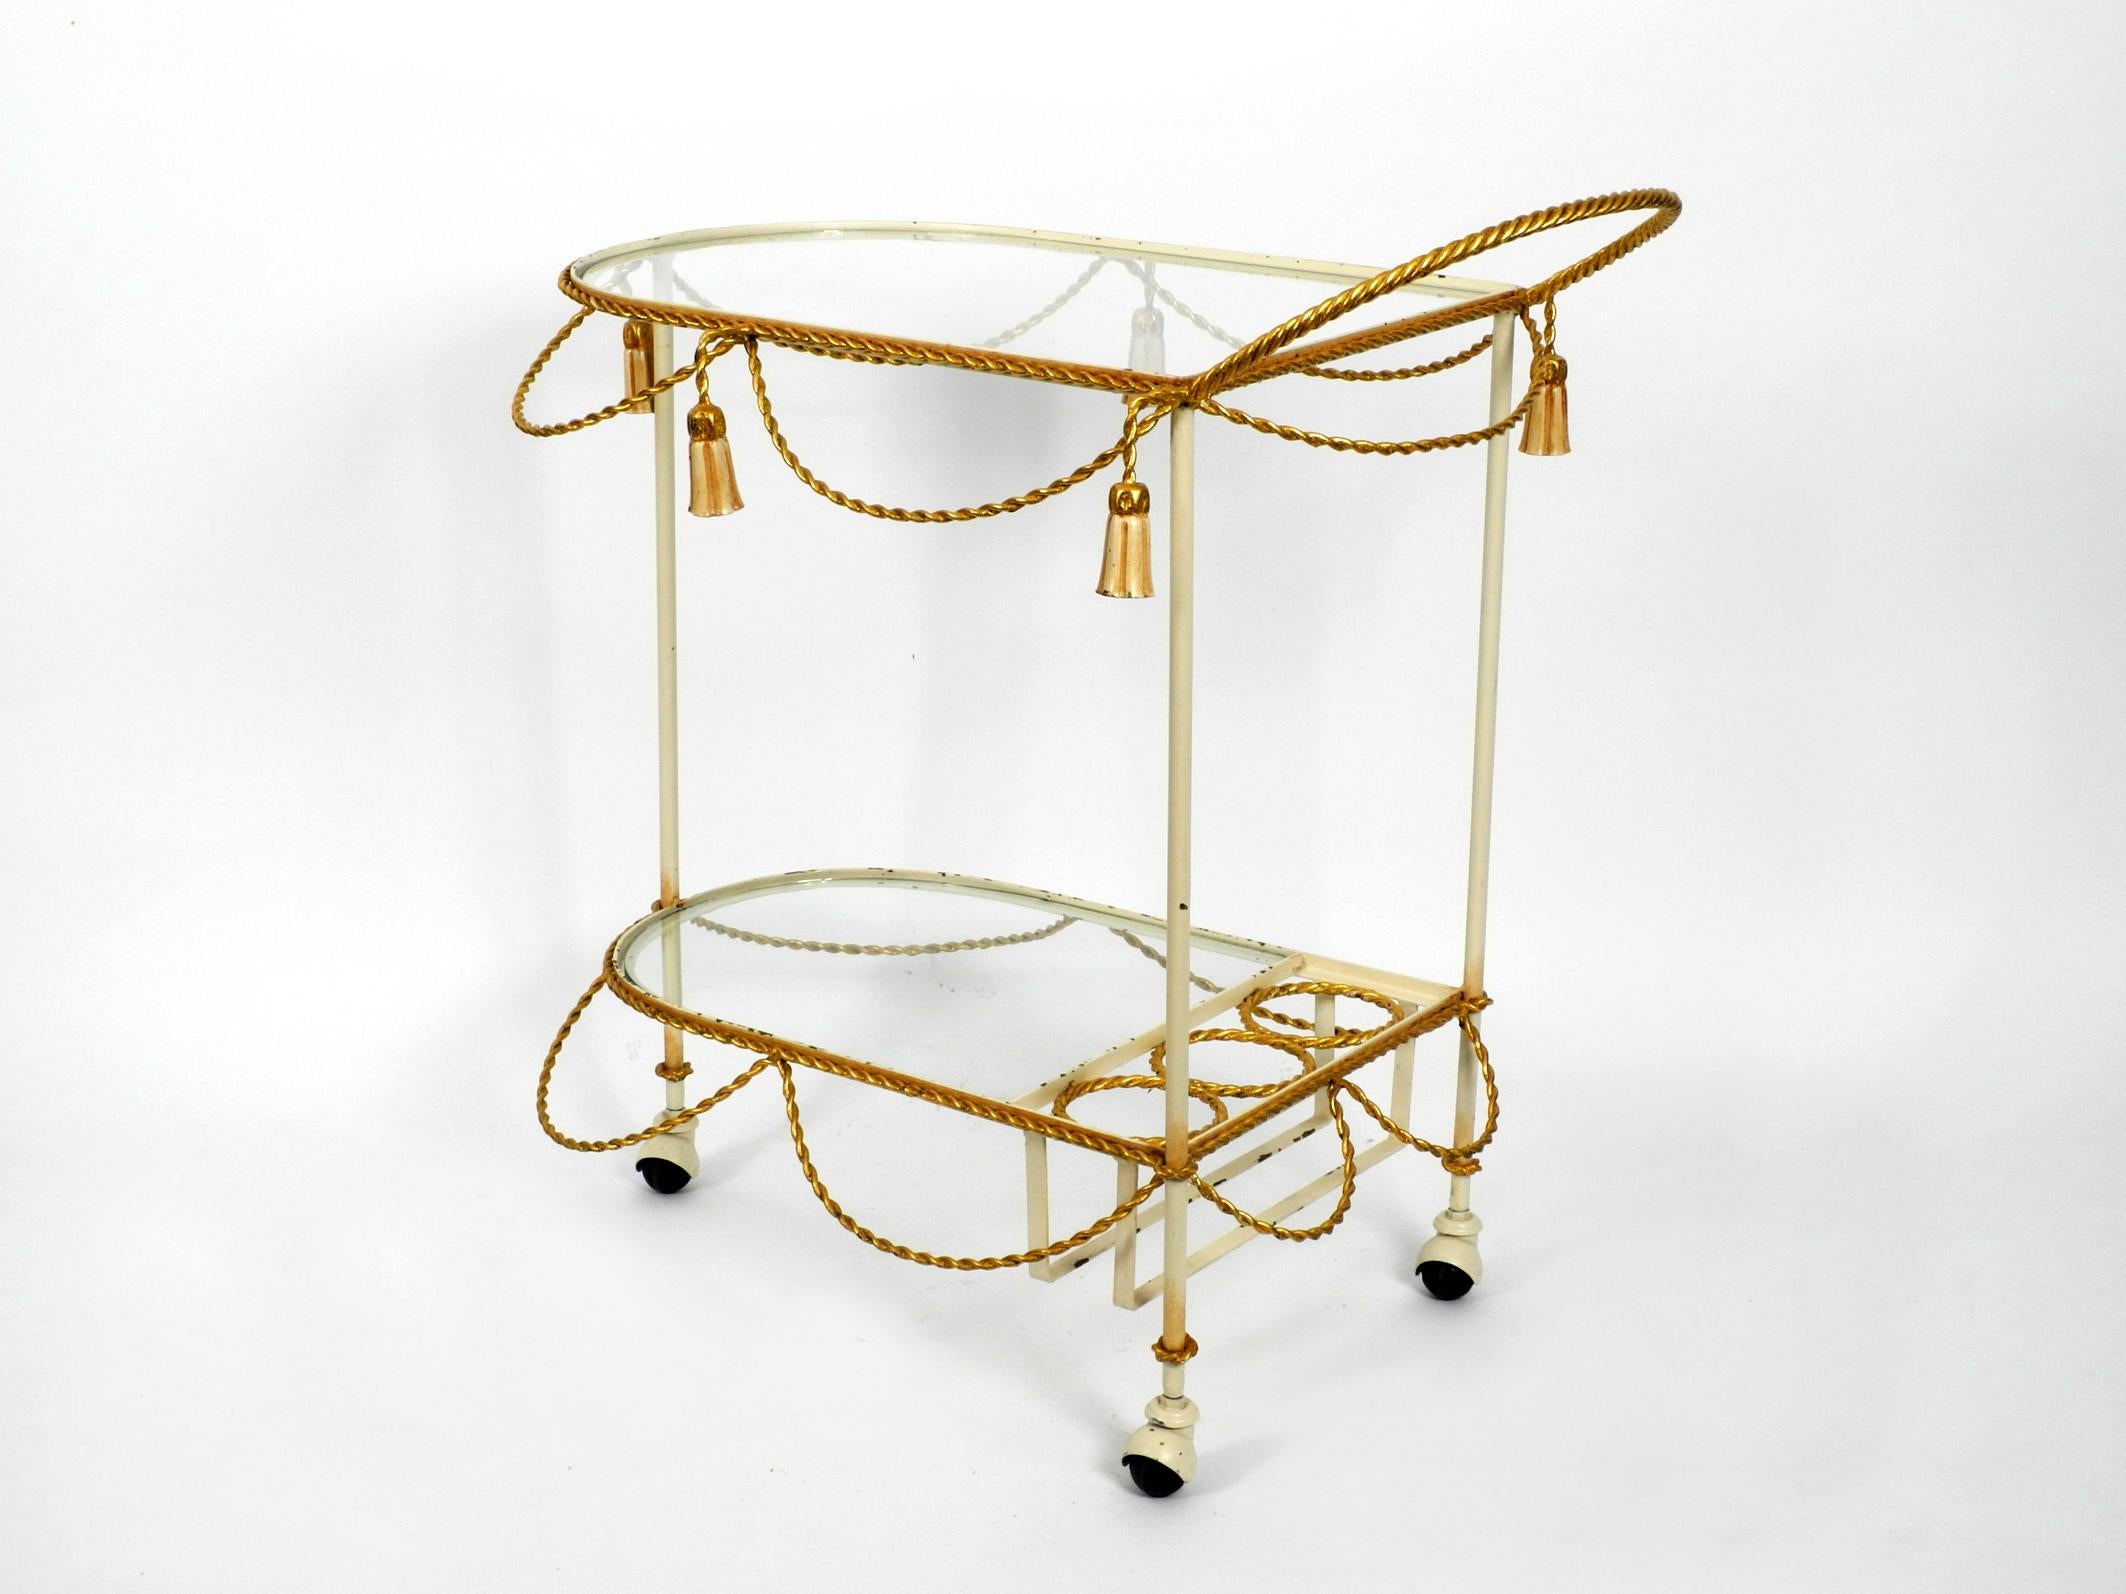 Very rare Italian Mid-Century Modern bar cart made of metal and glass. 
Great fancy design in Hollywood Regency style.
Entire metal bar cart frame is golden and beige. Very high quality, solid and heavy built.
Shelves are made of thick glass.